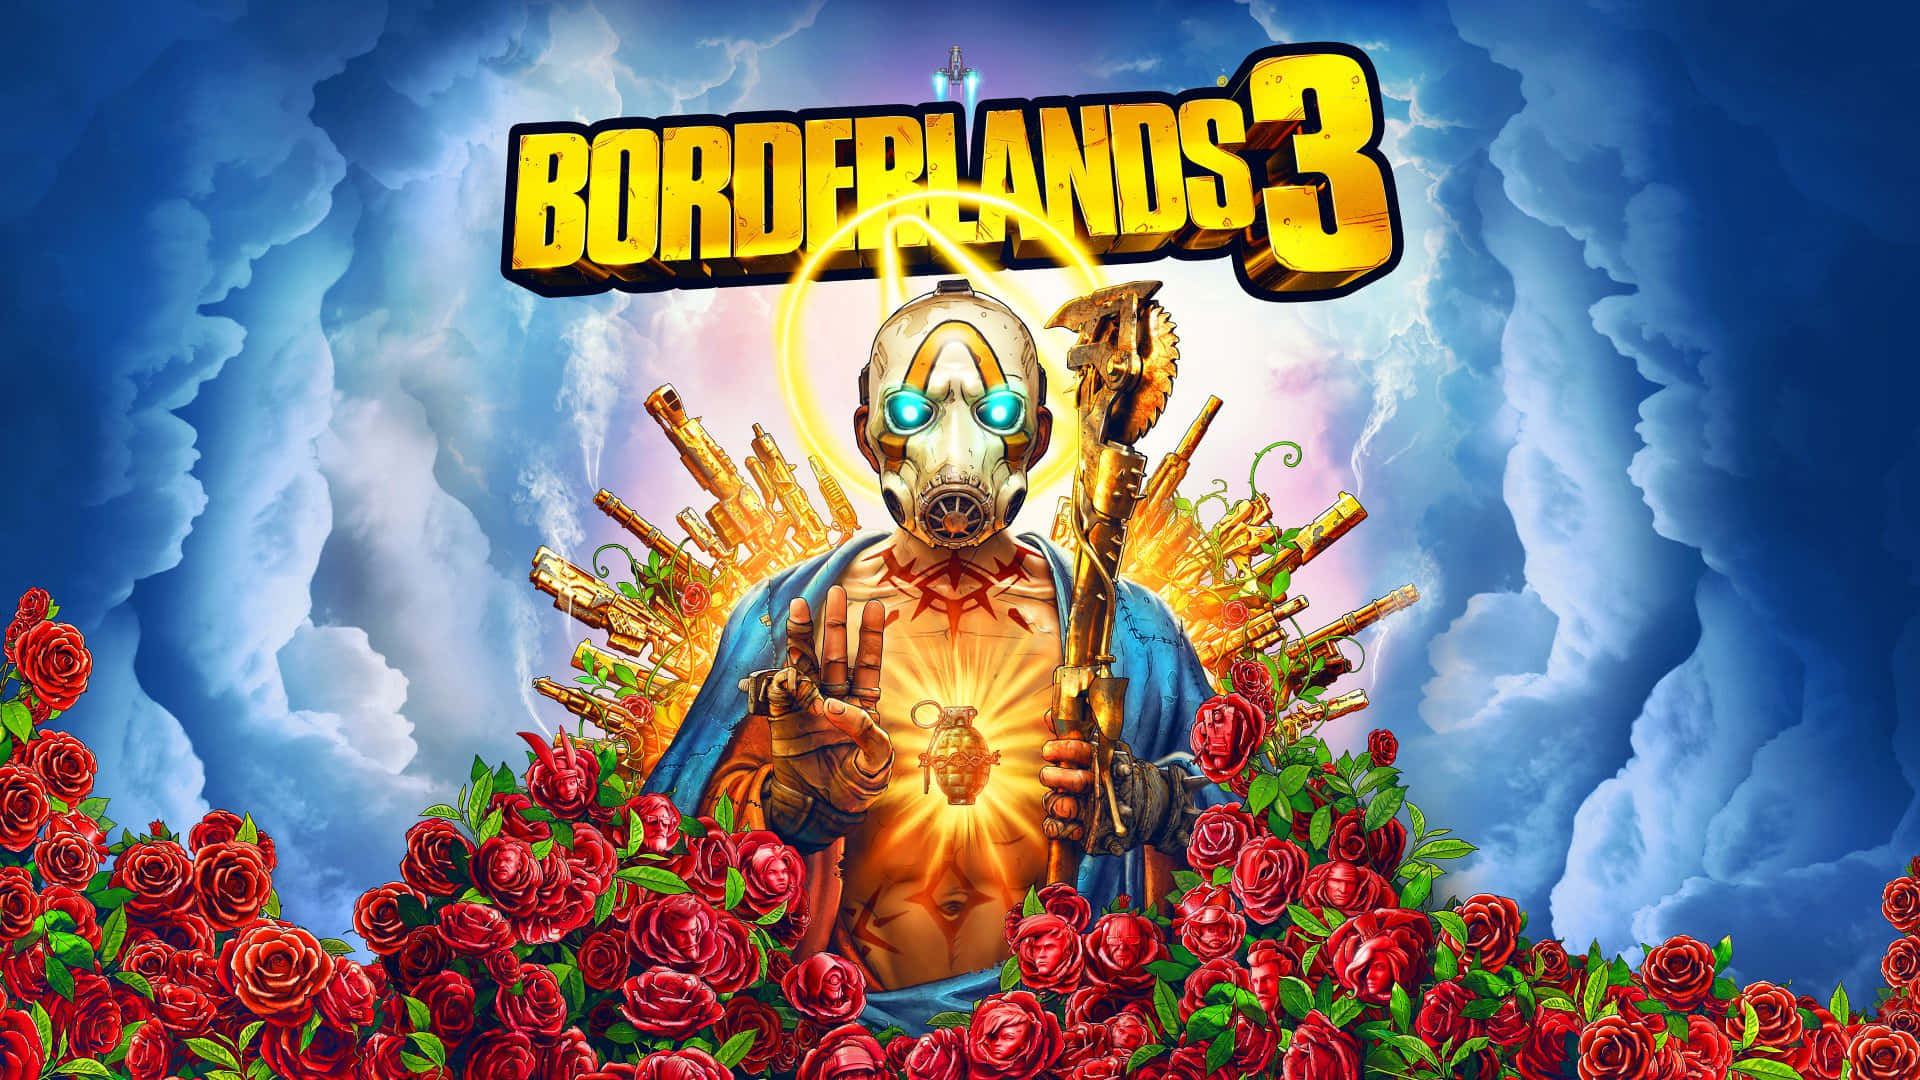 Get Ready for an Epic Adventure in Borderlands 3